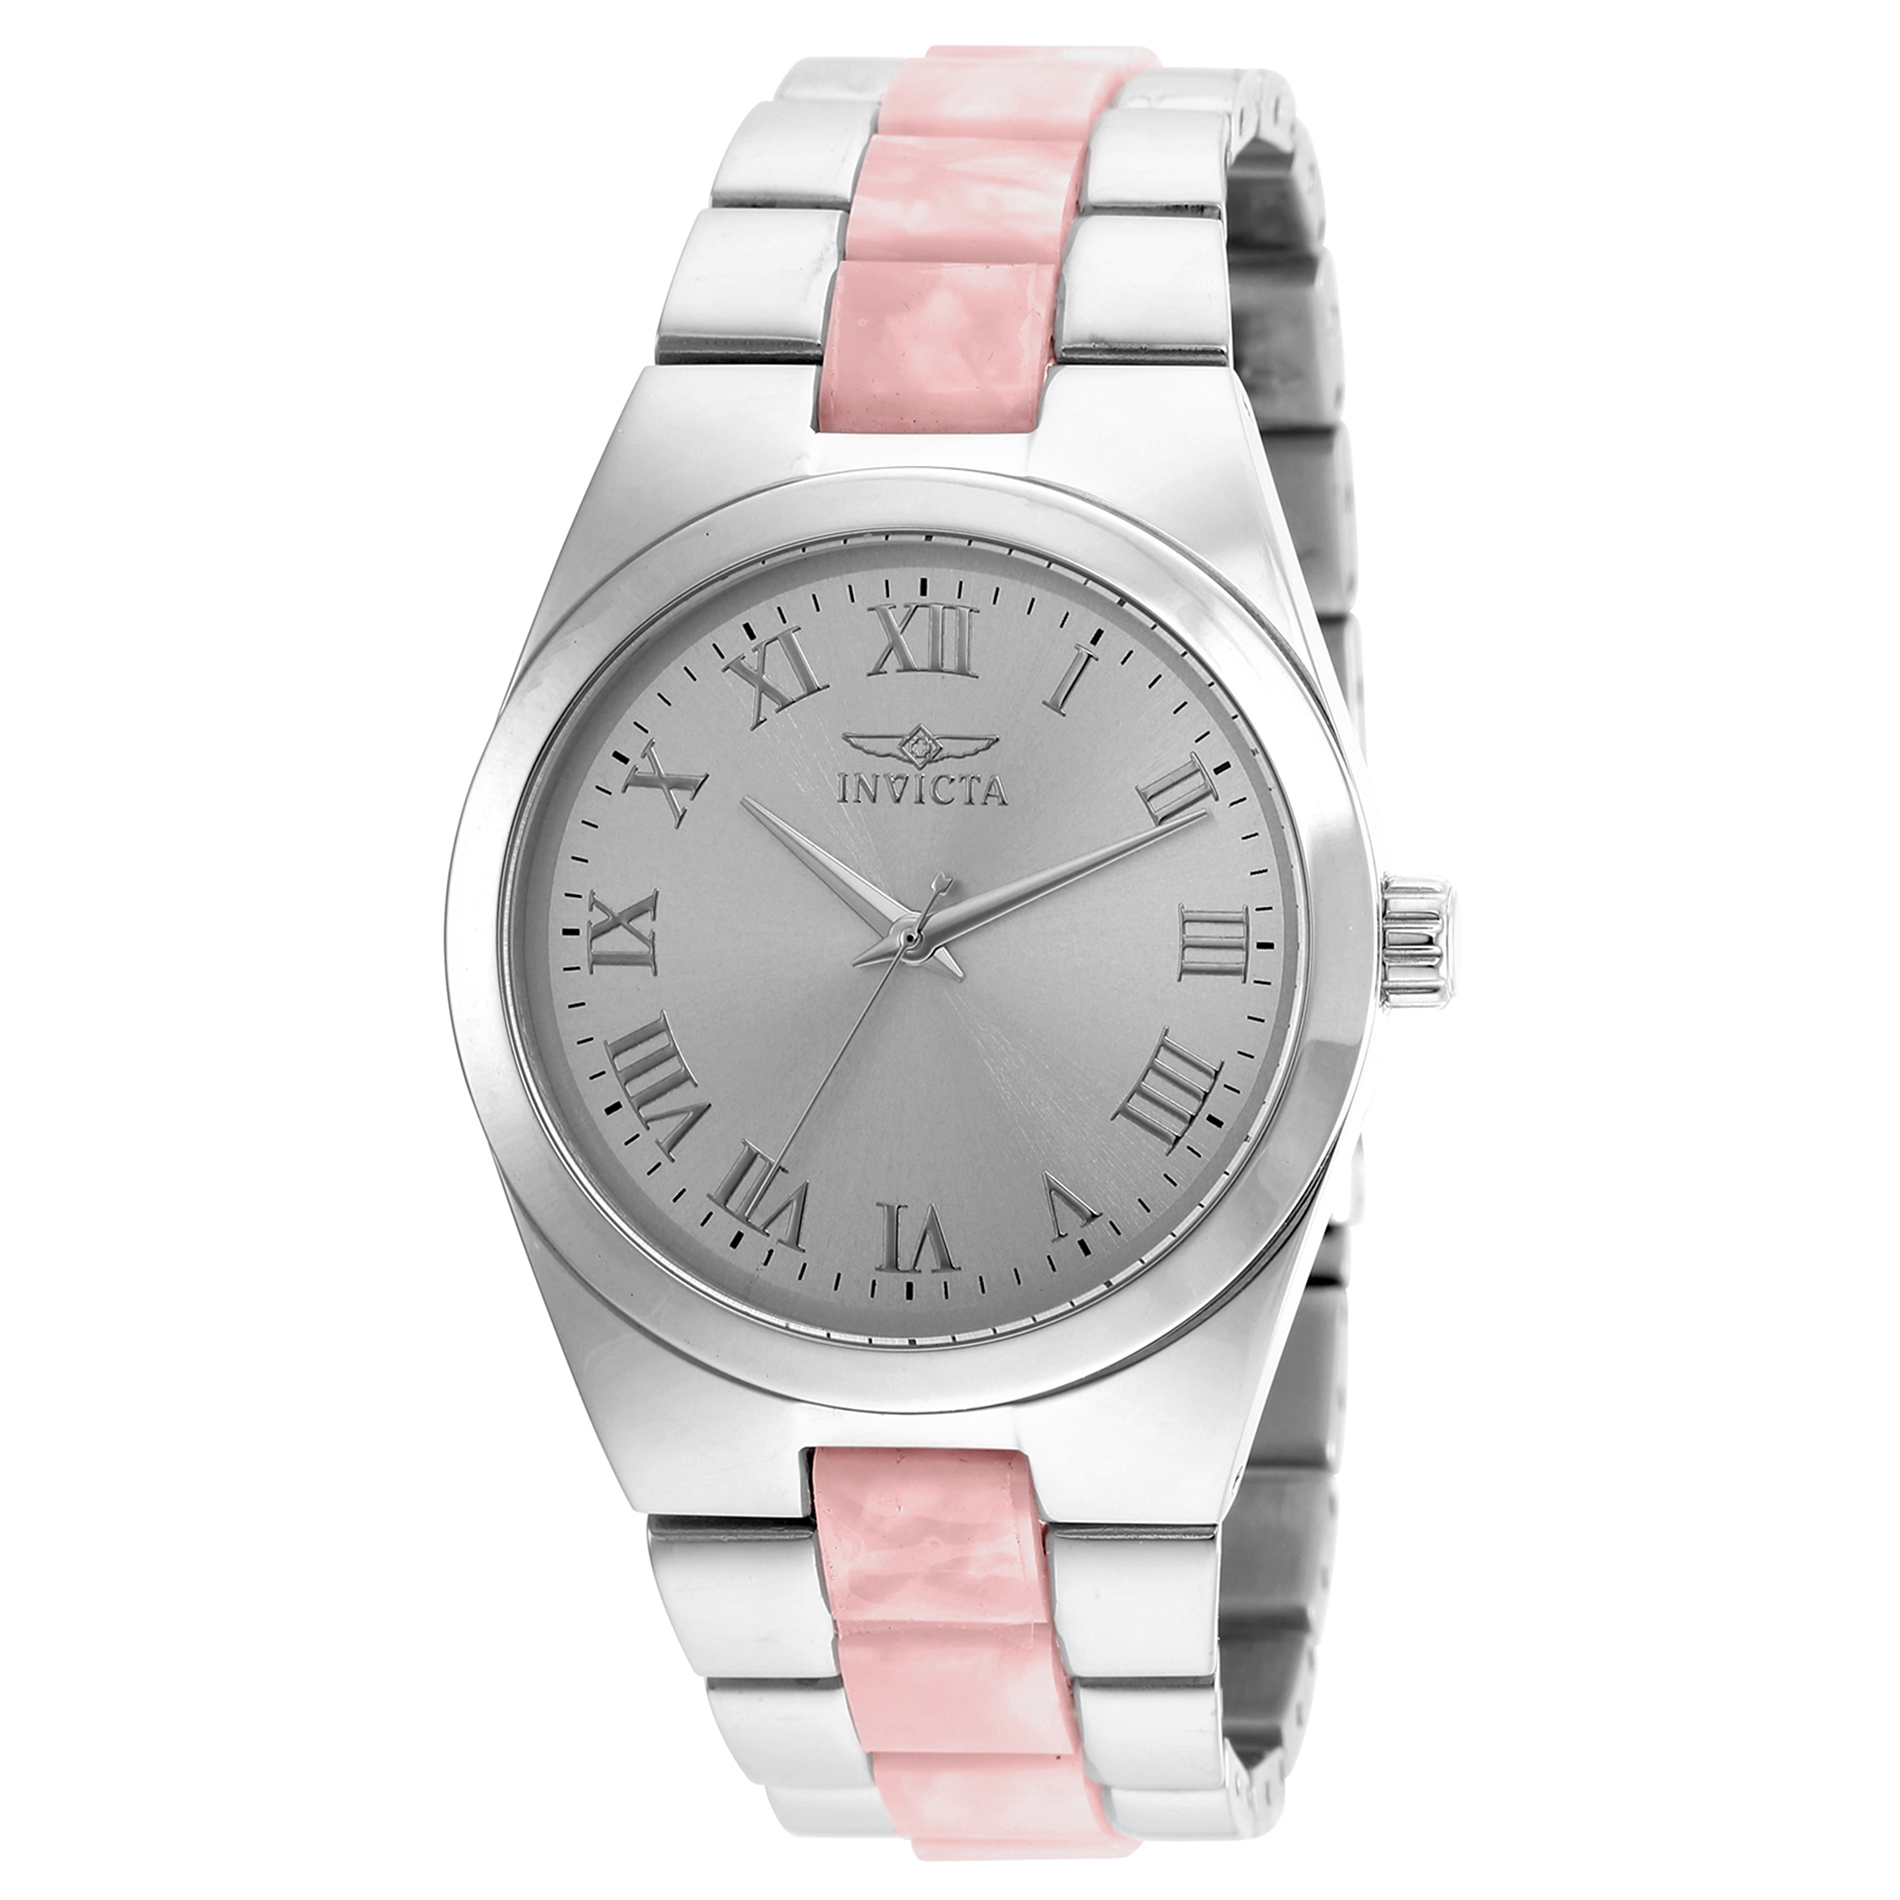 0886678253104 - ANGEL LADIES 38MM STAINLESS STEEL STAINLESS STEEL SILVER DIAL PC21 QUARTZ WATCH